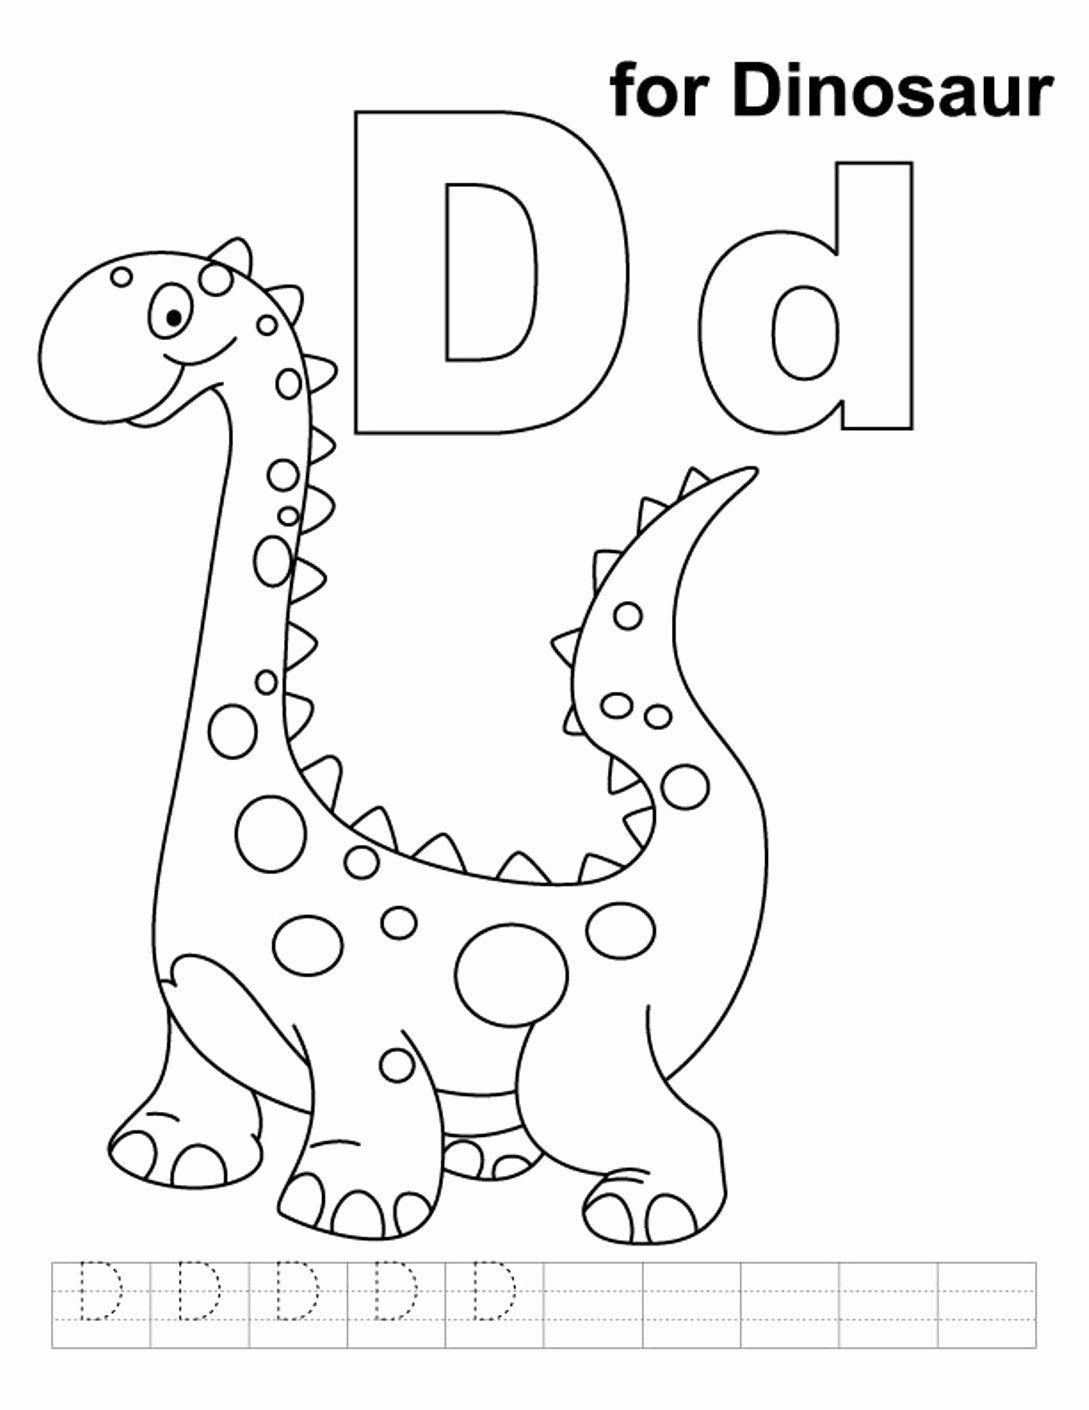 Alphabet Coloring Worksheets for 3 Year Olds | Coloring Pages Gallery